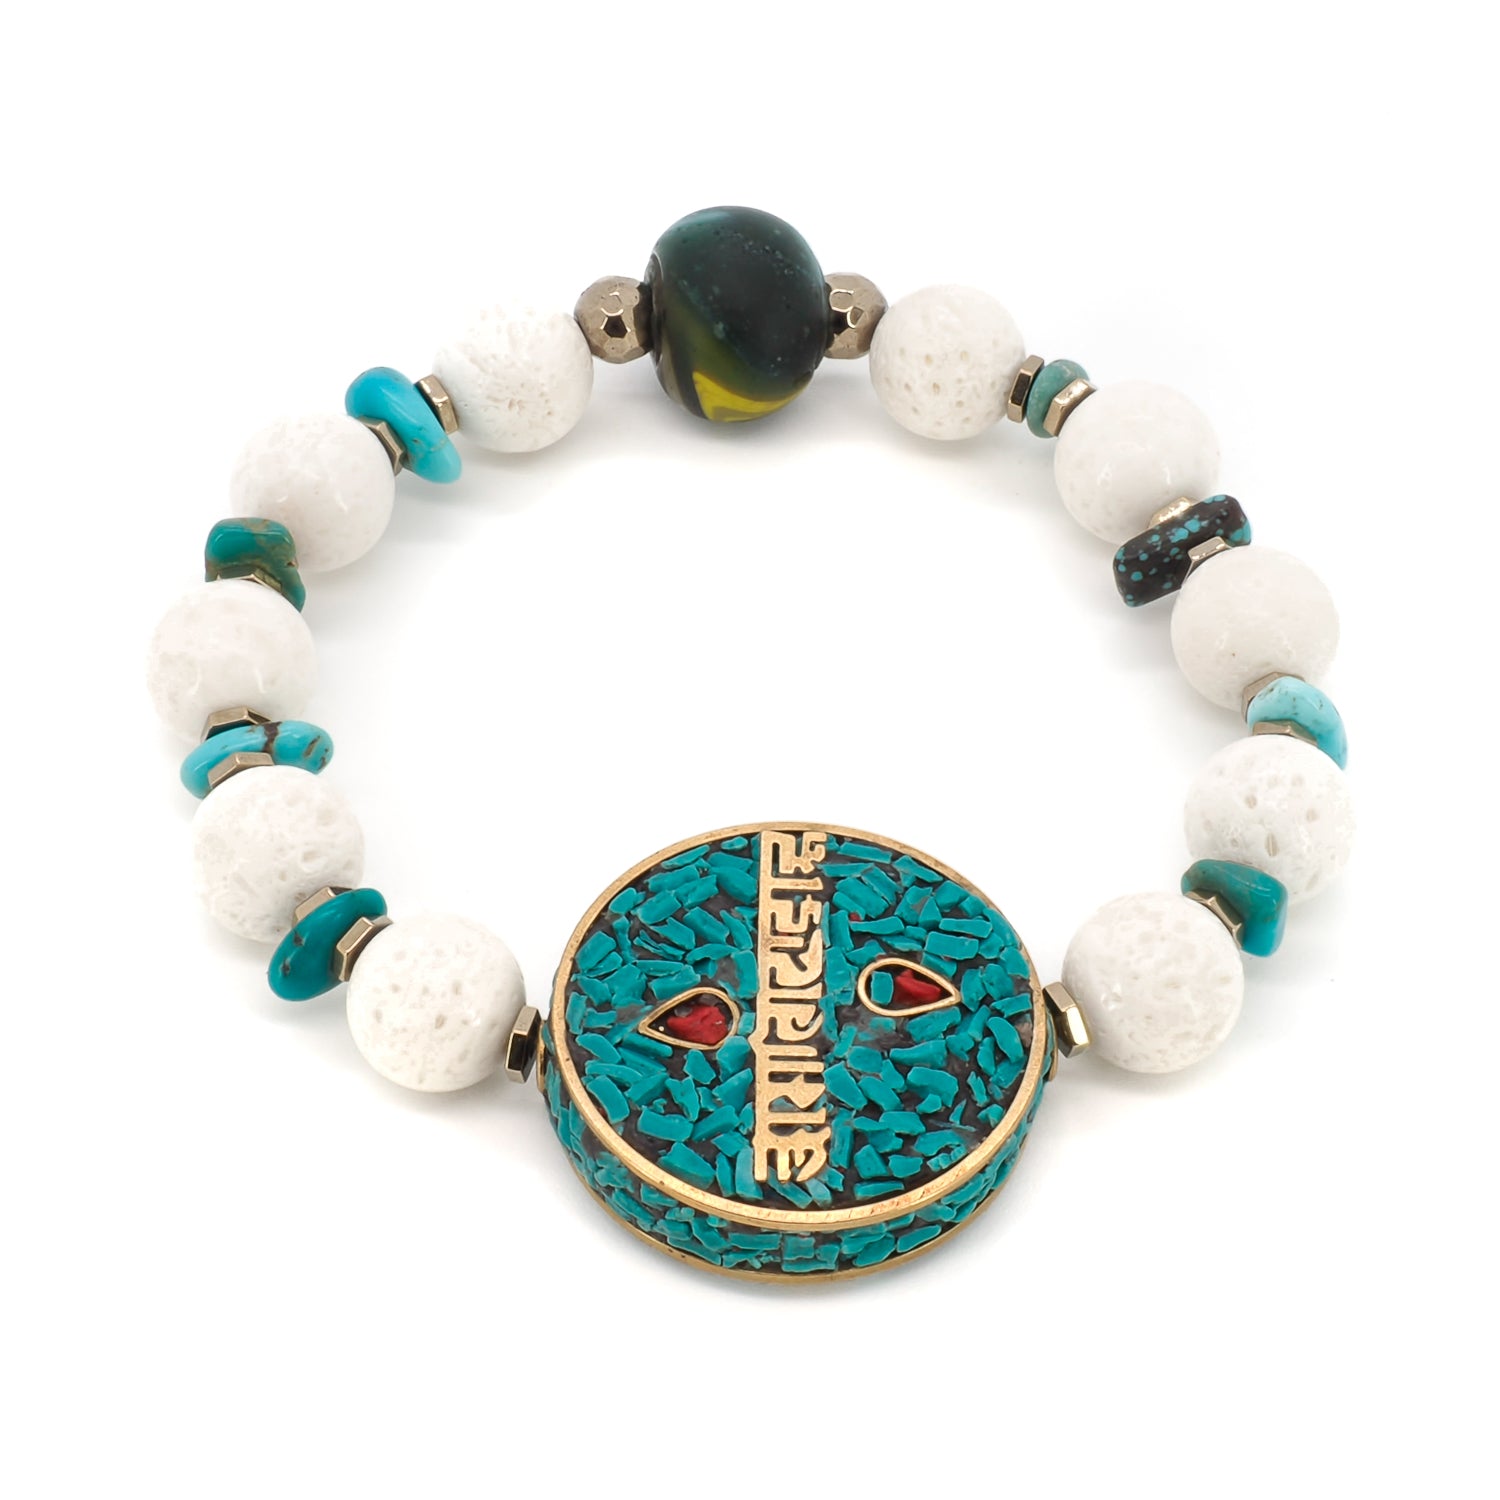 Admire the beauty of the OM Mani Mantra Bracelet, featuring white mountain jade stone beads and a Nepal OM Mani Padme Hum Mantra bead.